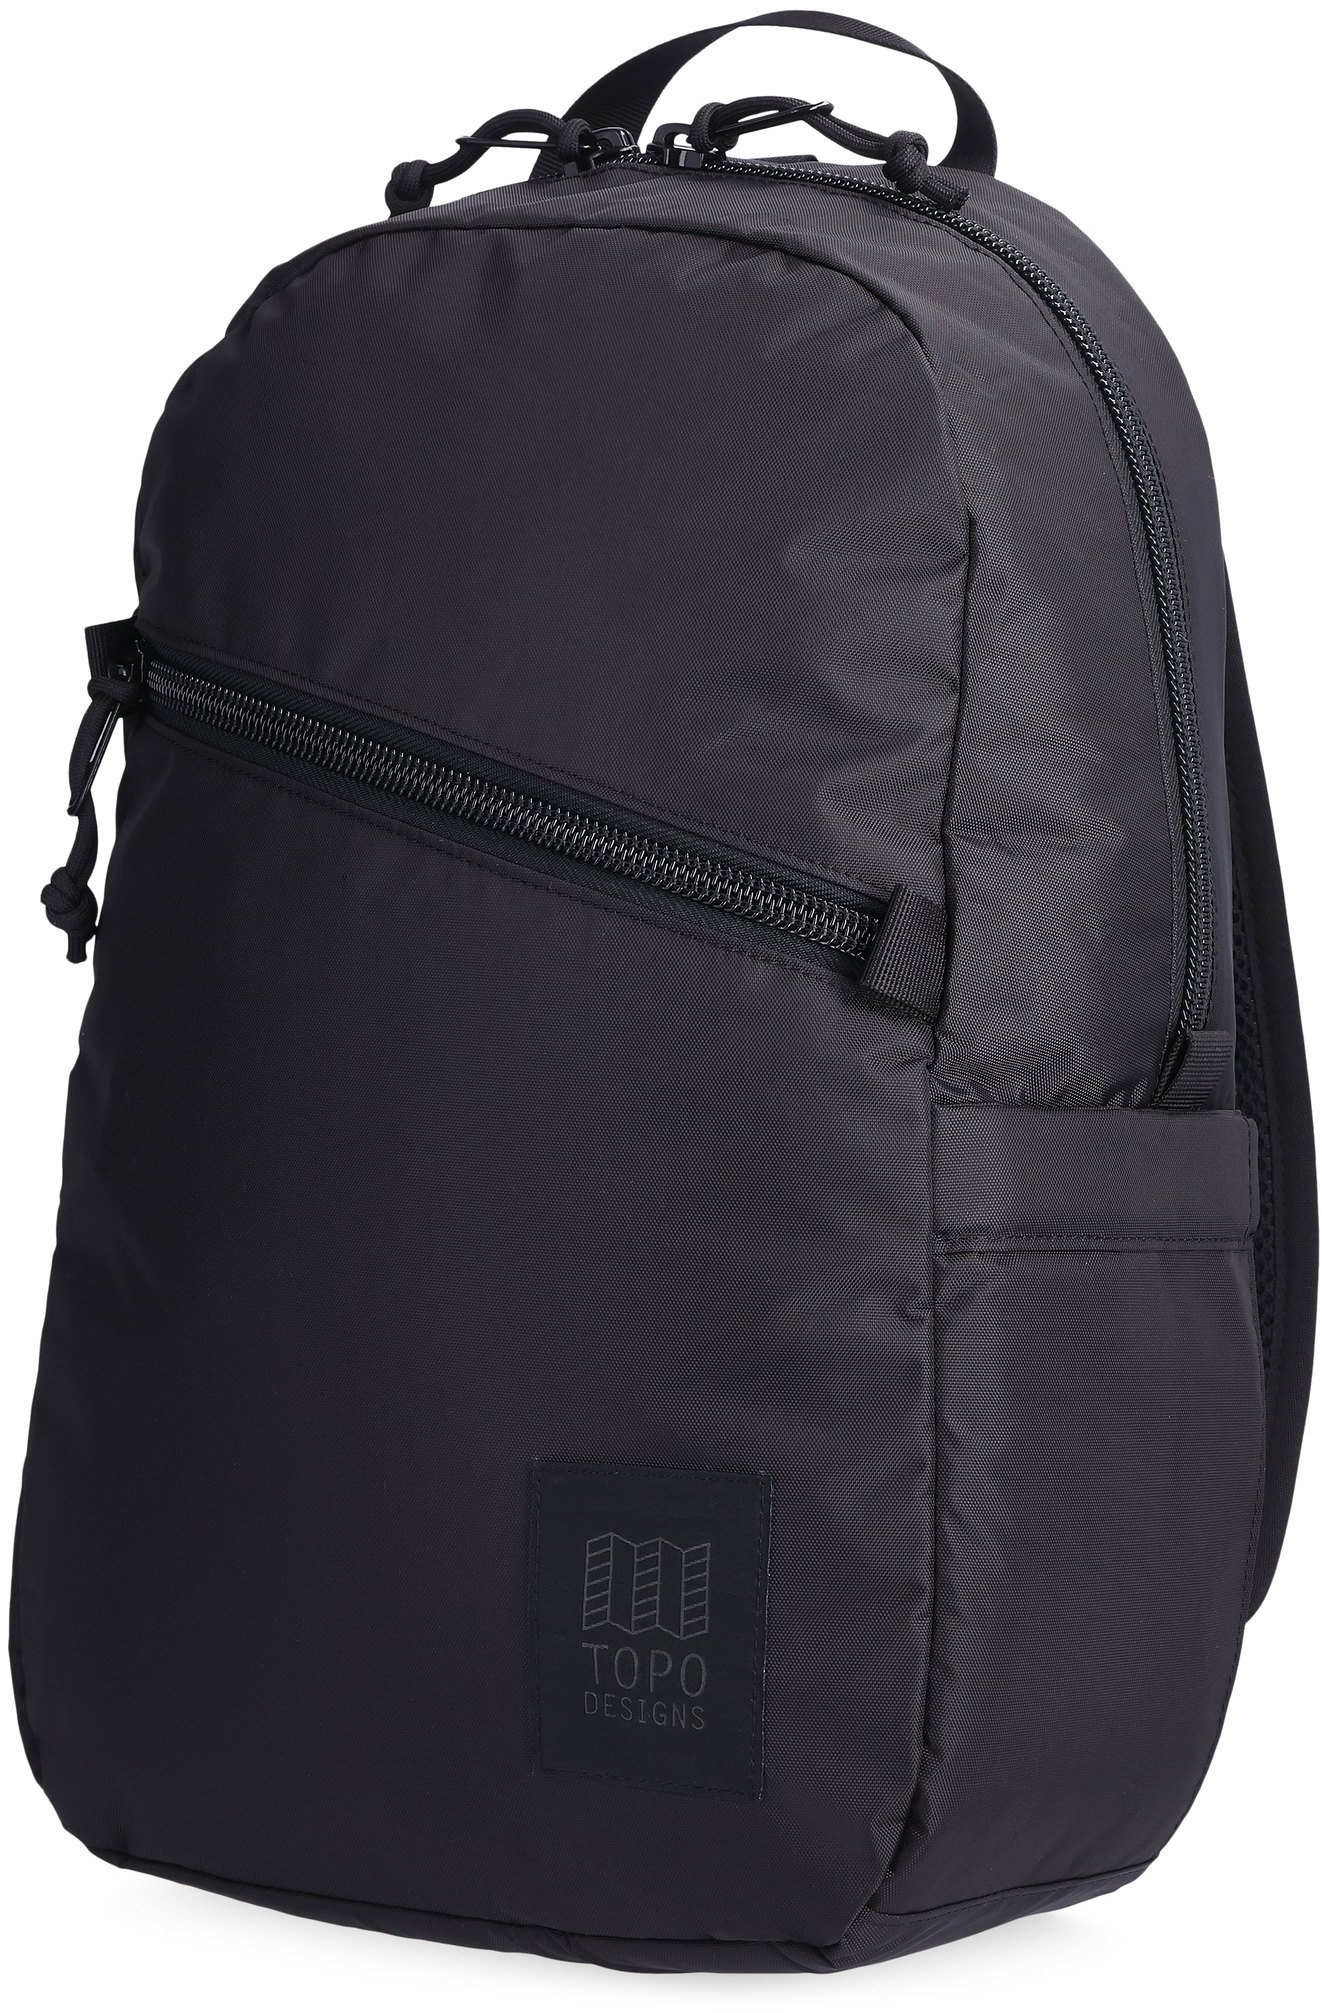 Topo Designs Laptop Sleeve Review